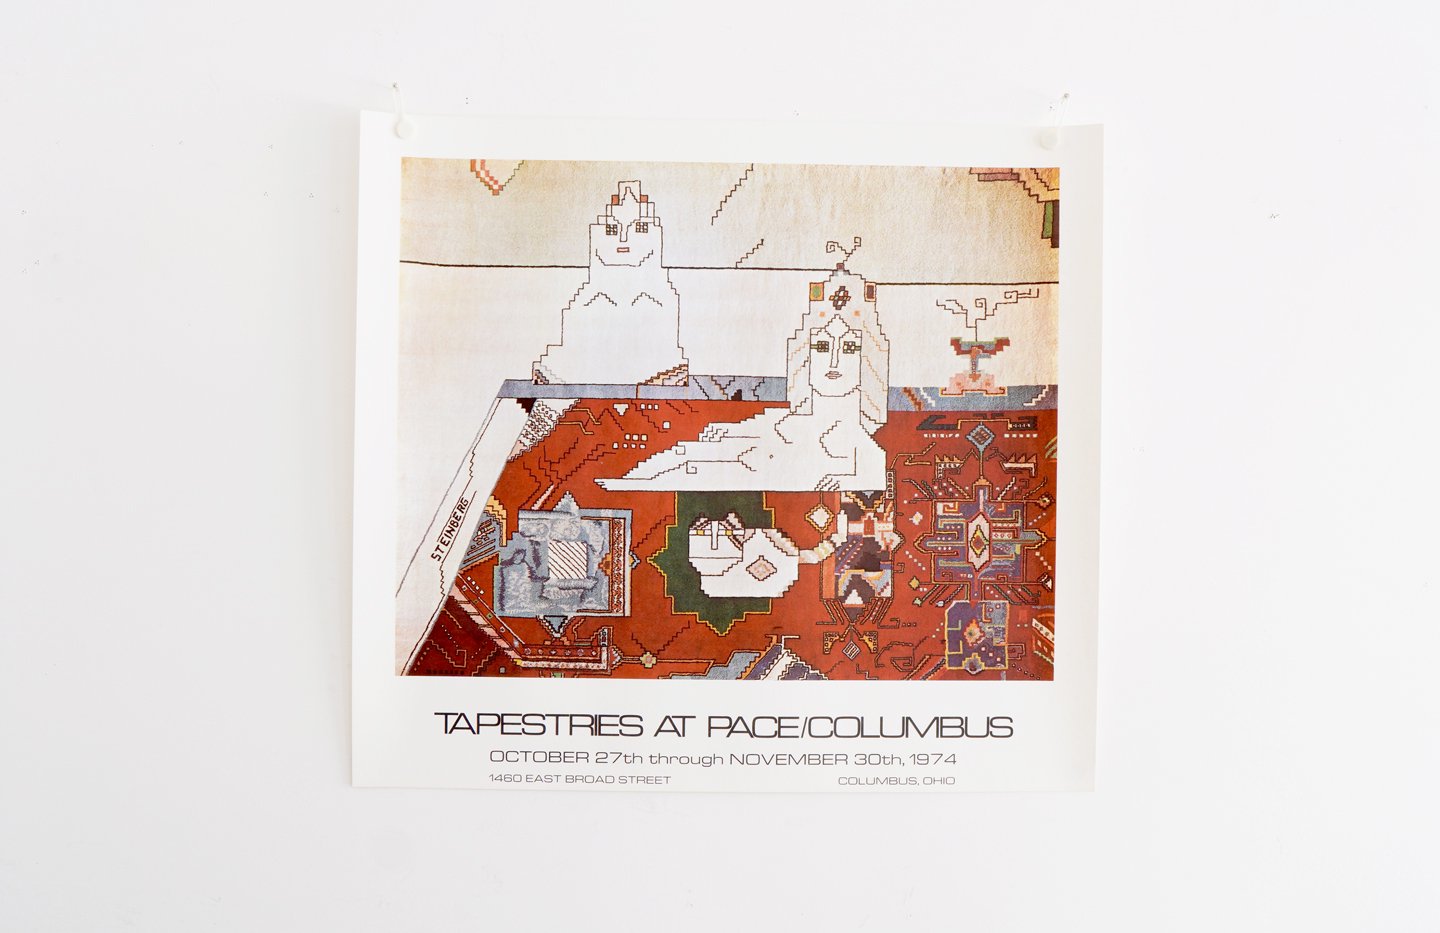 Saul Steinberg - Tapestries at Pace/Columbus 1974 - アート